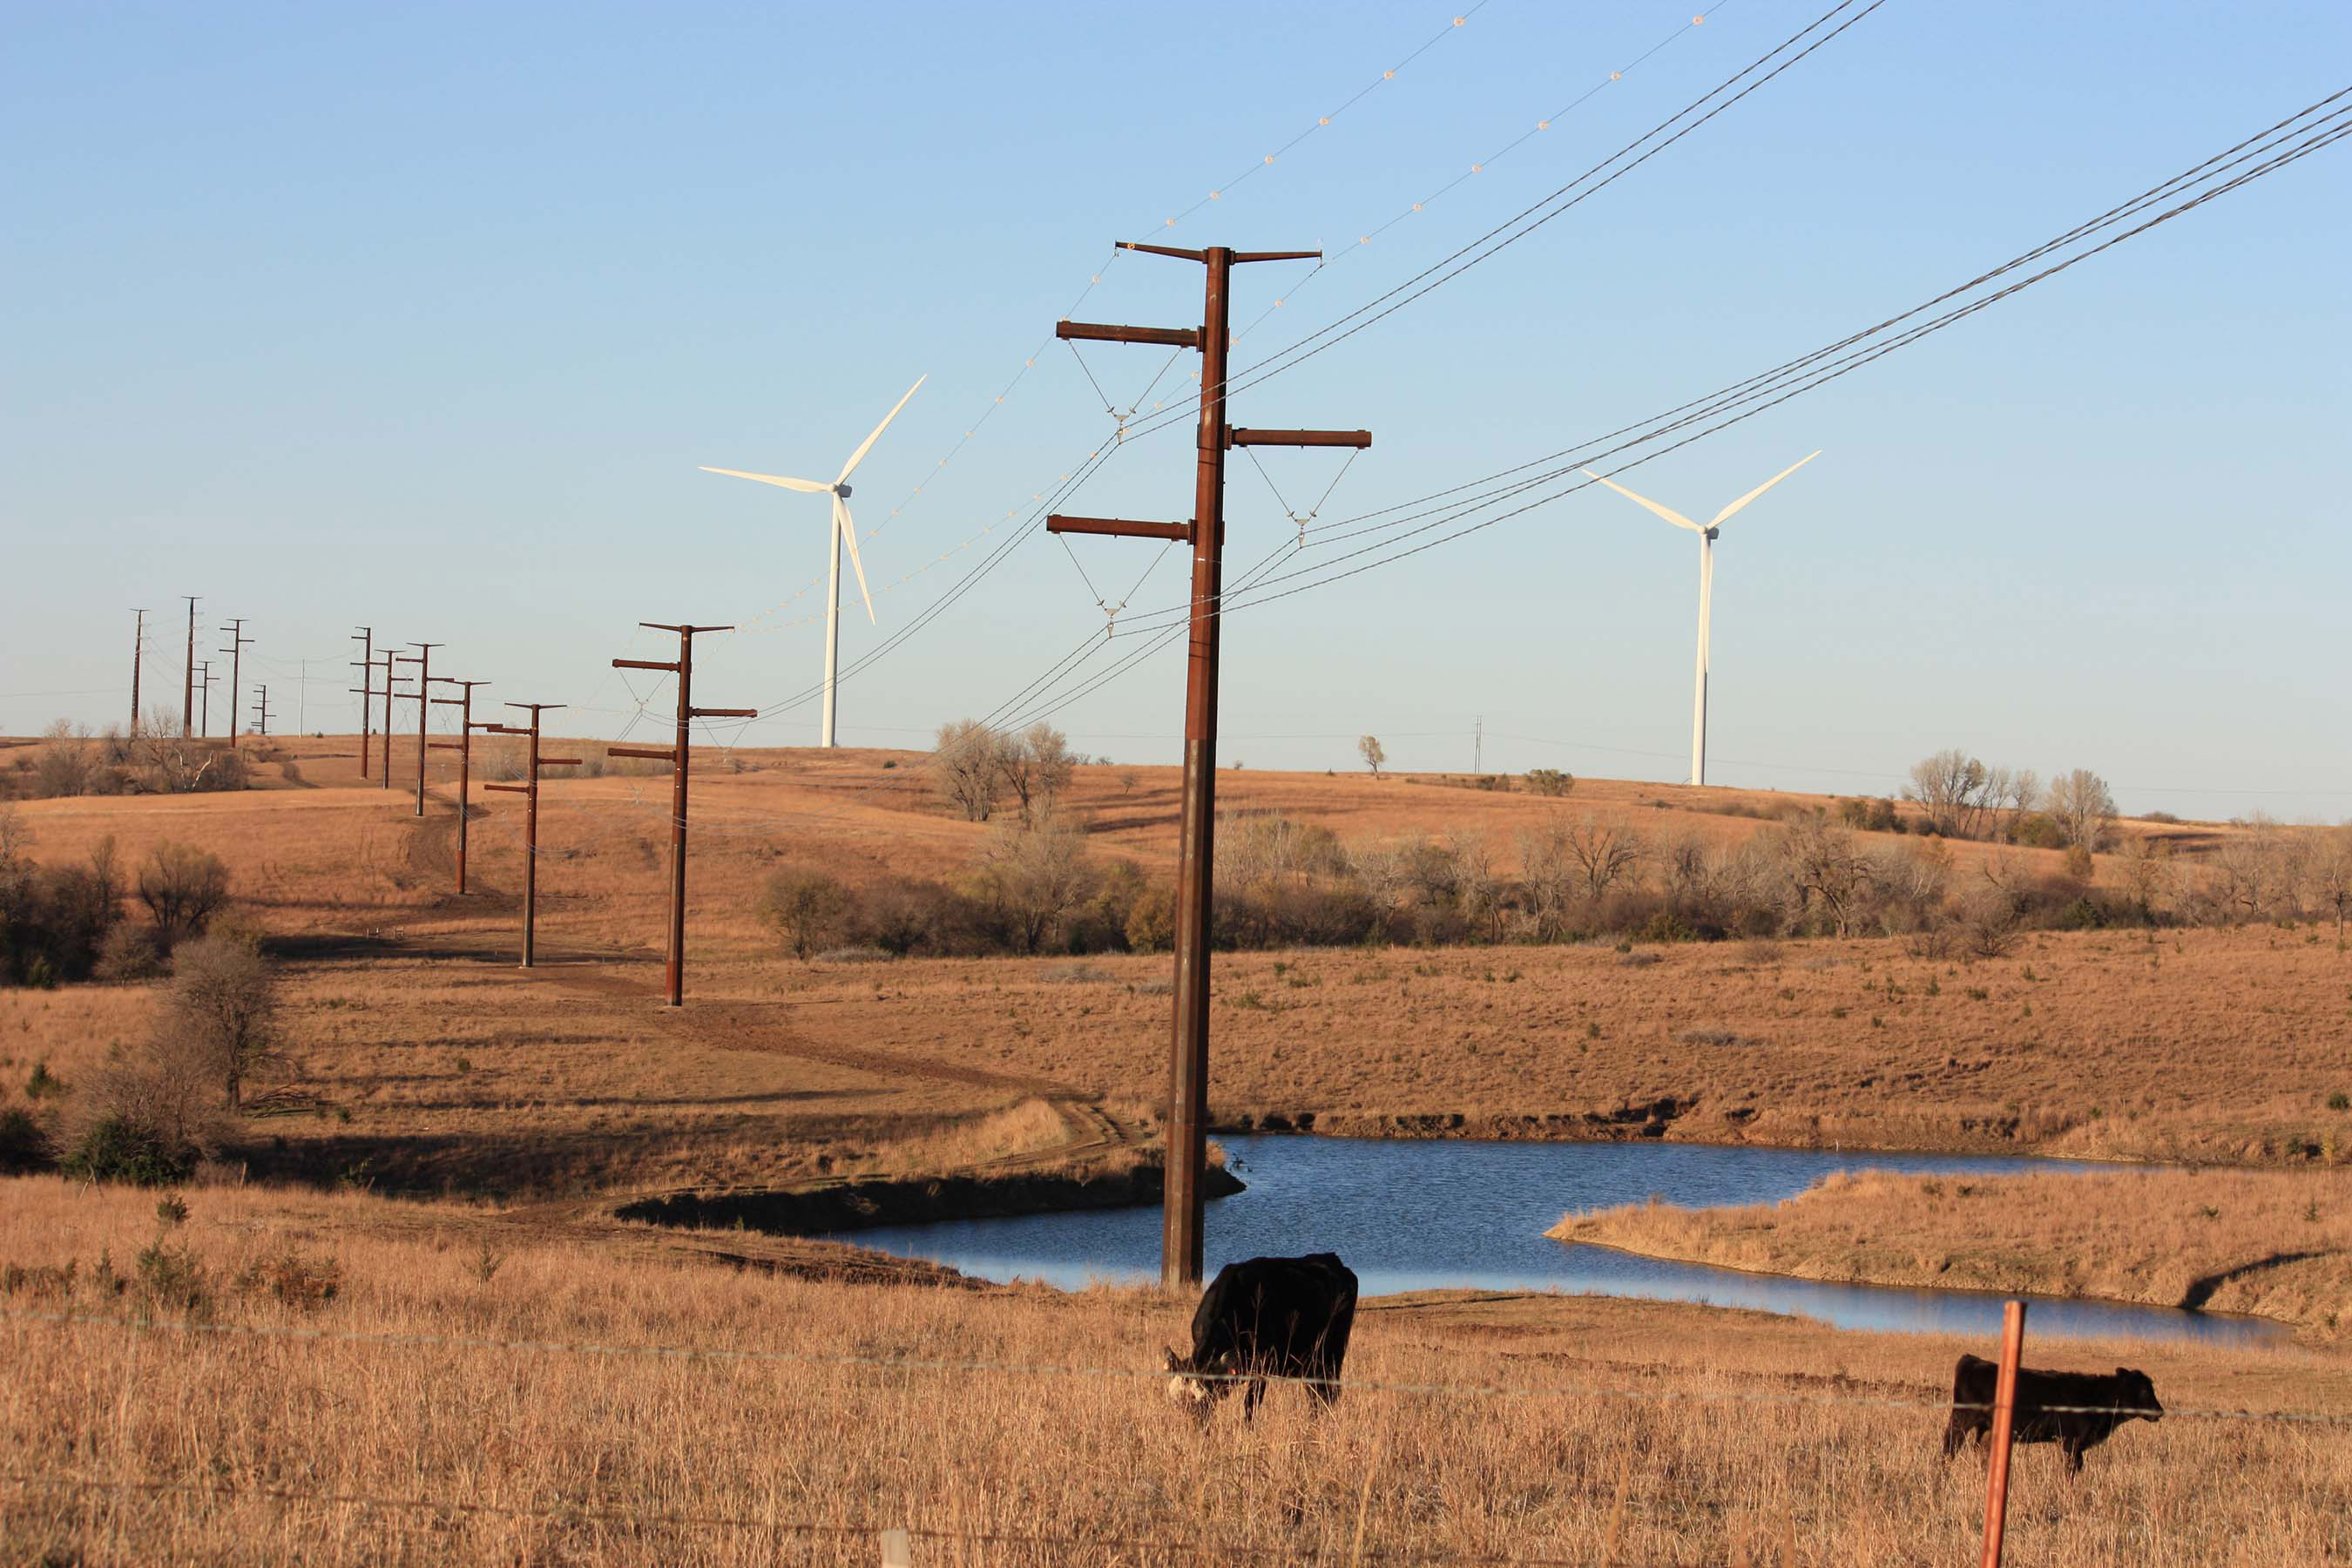 ITC has constructed four projects in Kansas and Oklahoma in recent years to strengthen the regional grid, facilitate renewable energy development and support competitive energy markets.